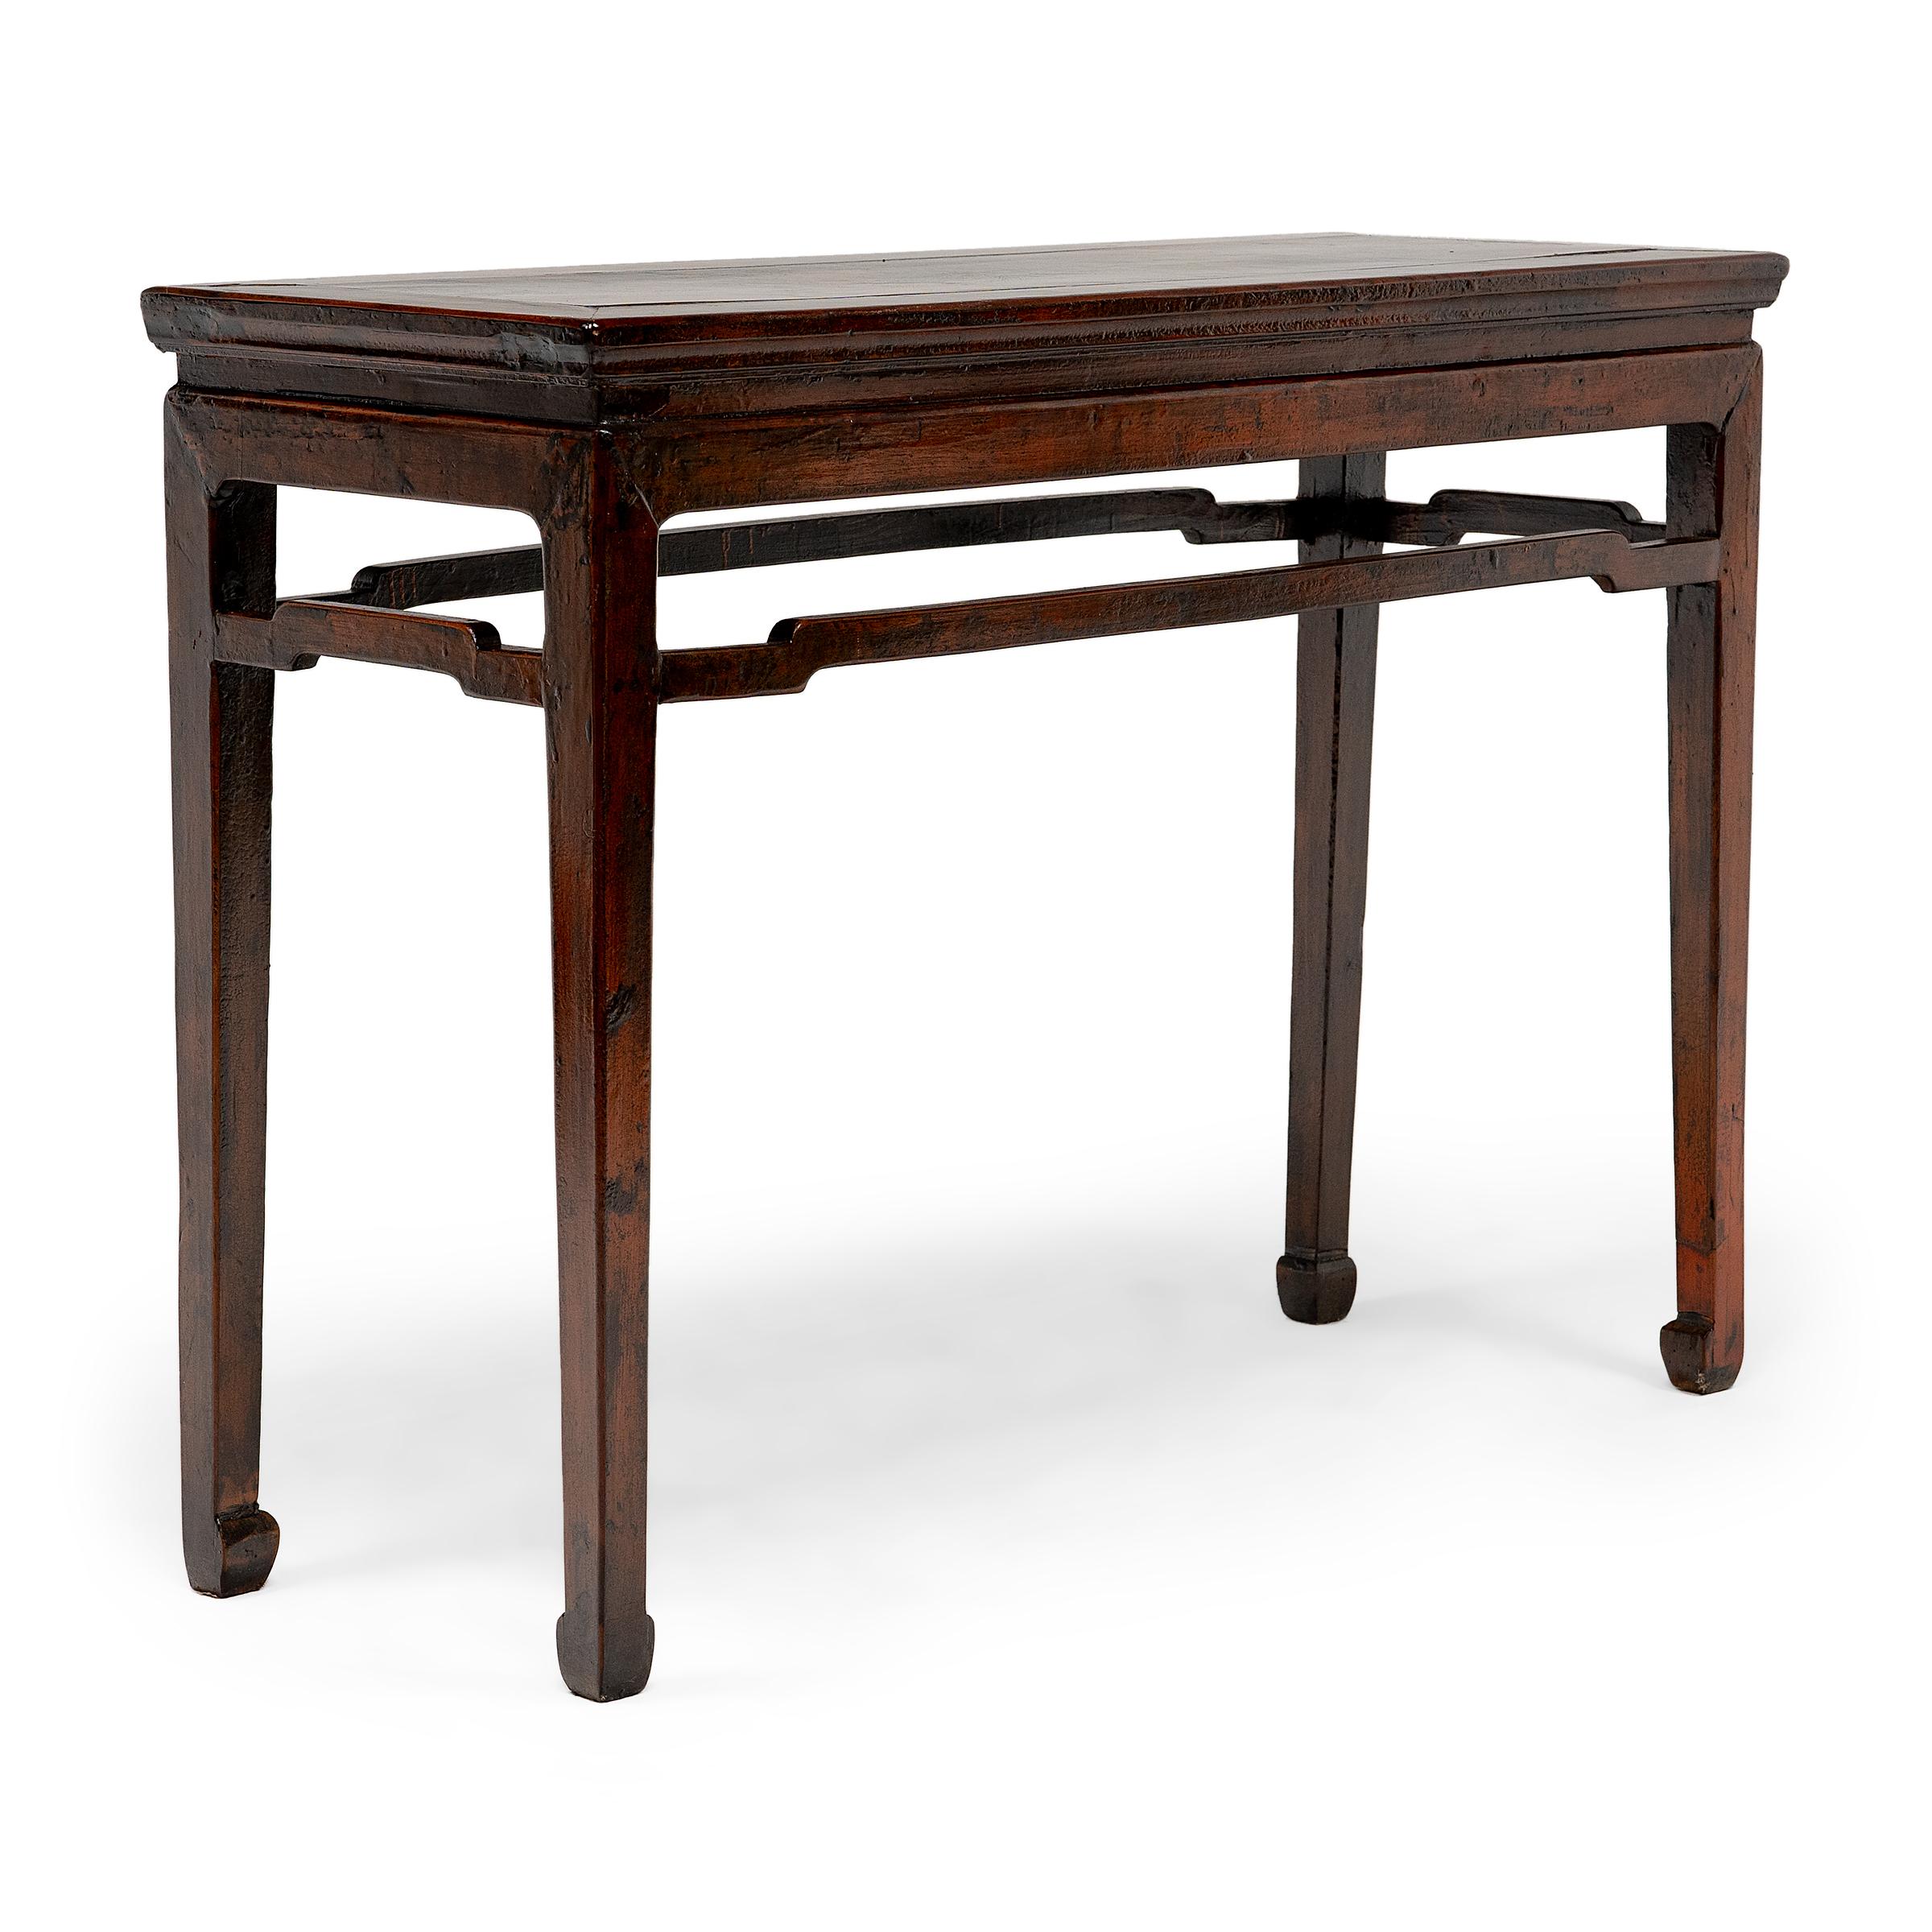 Perfected in the Ming dynasty, complex joinery techniques allowed craftsmen to create furniture with flowing lines, a sense of lightness, and remarkable durability. Crafted from pine, this early 20th-century offering table employs these traditional